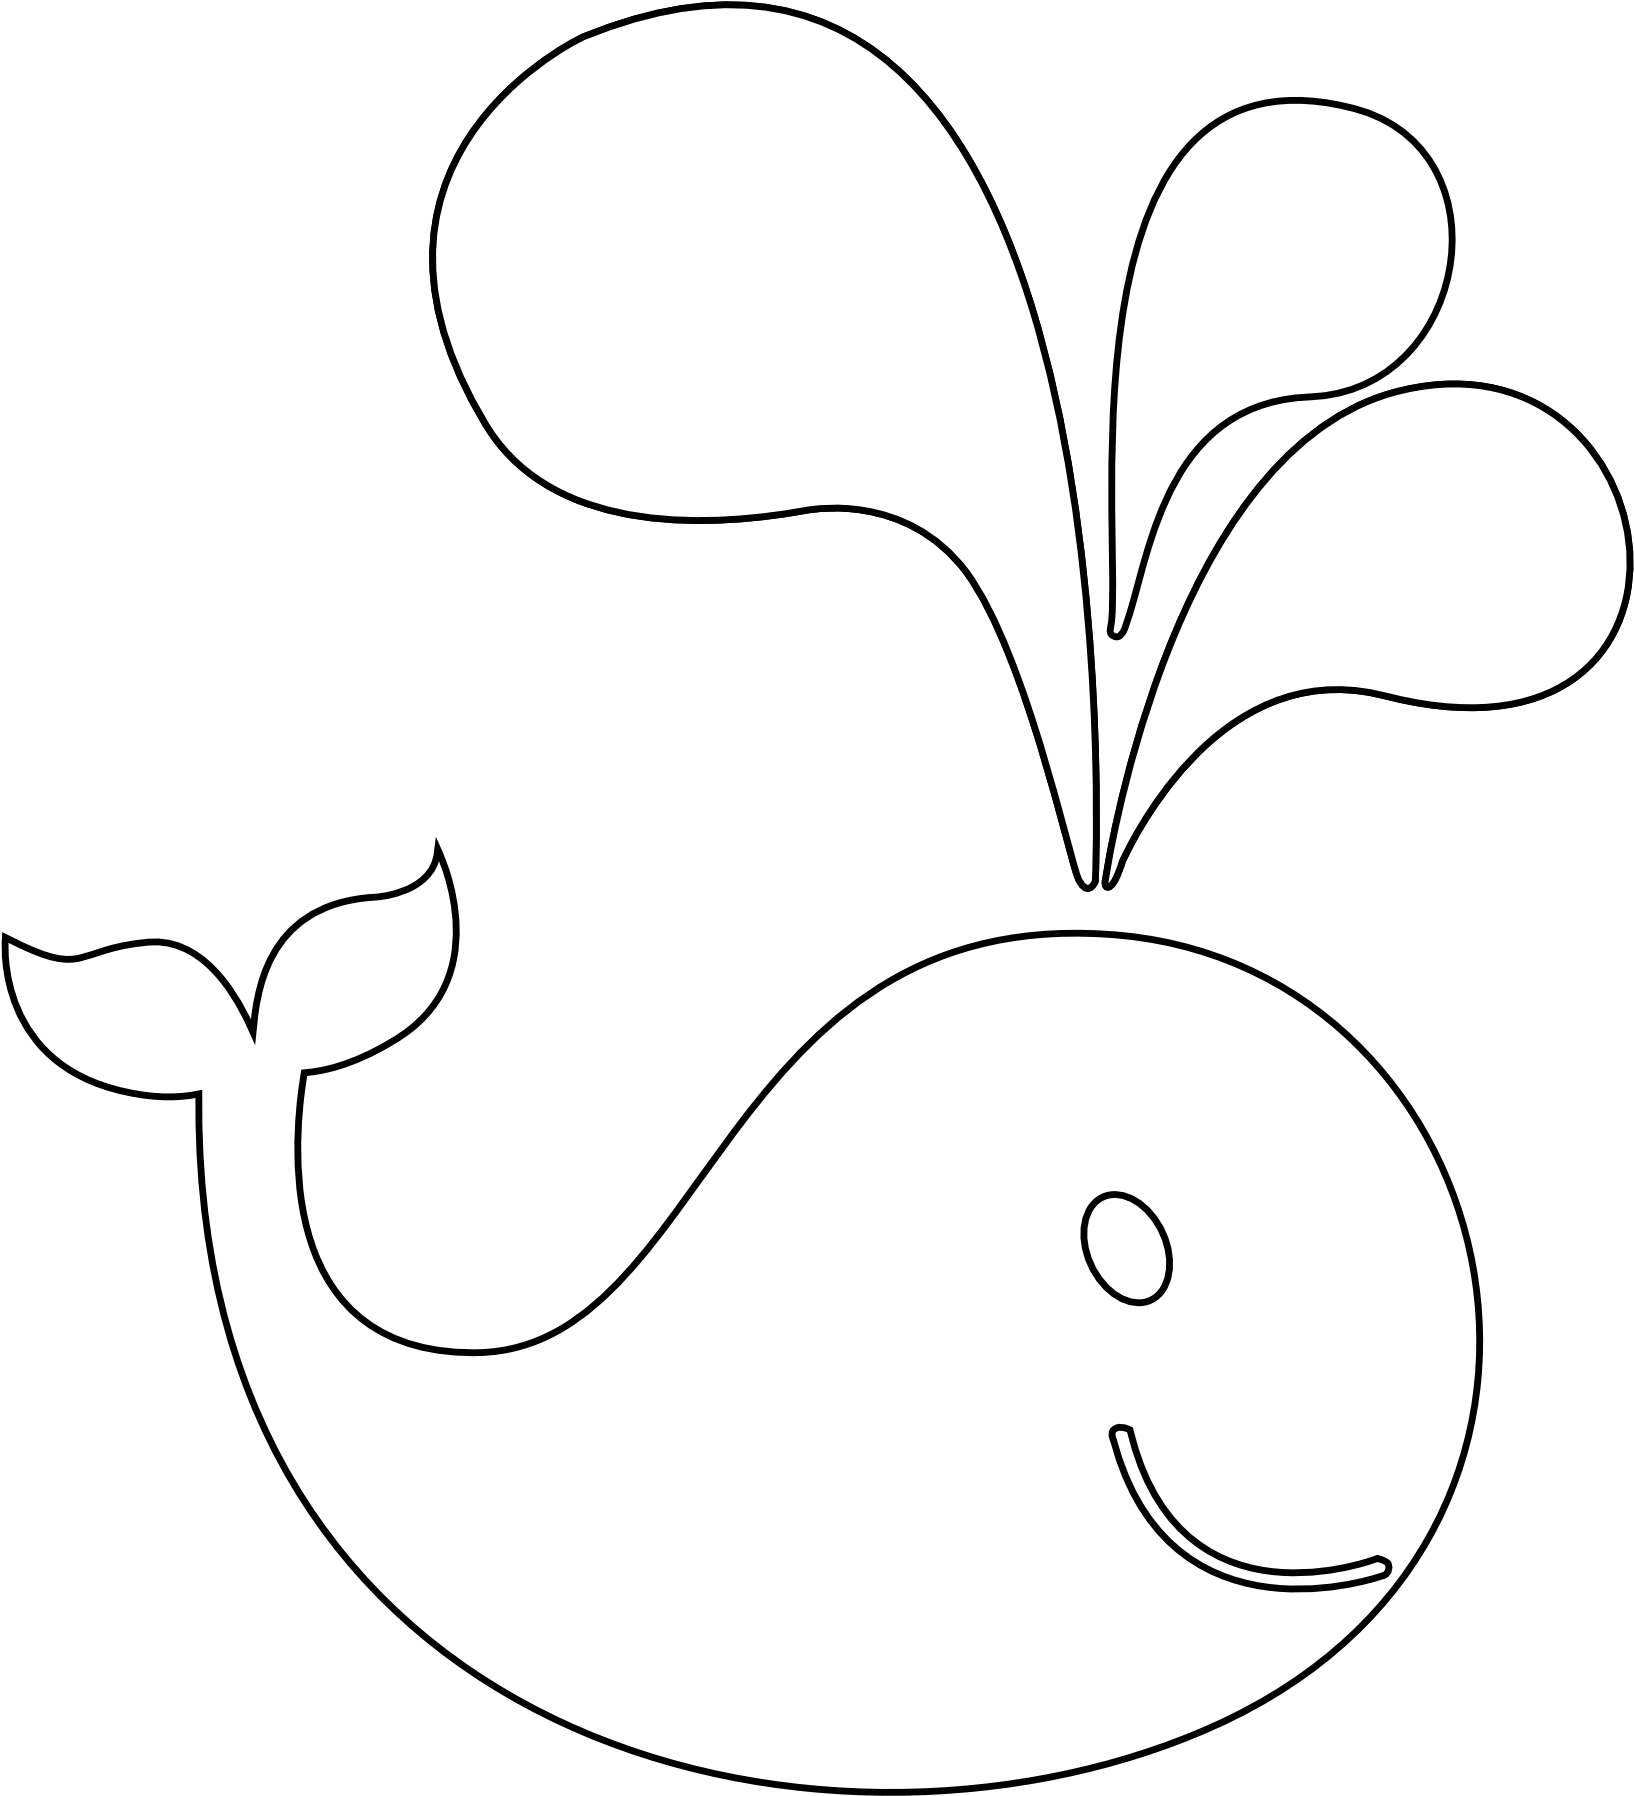 Adobe Illustrator Clipart Px Free Download - Black And White Image Whale (1969x1969)